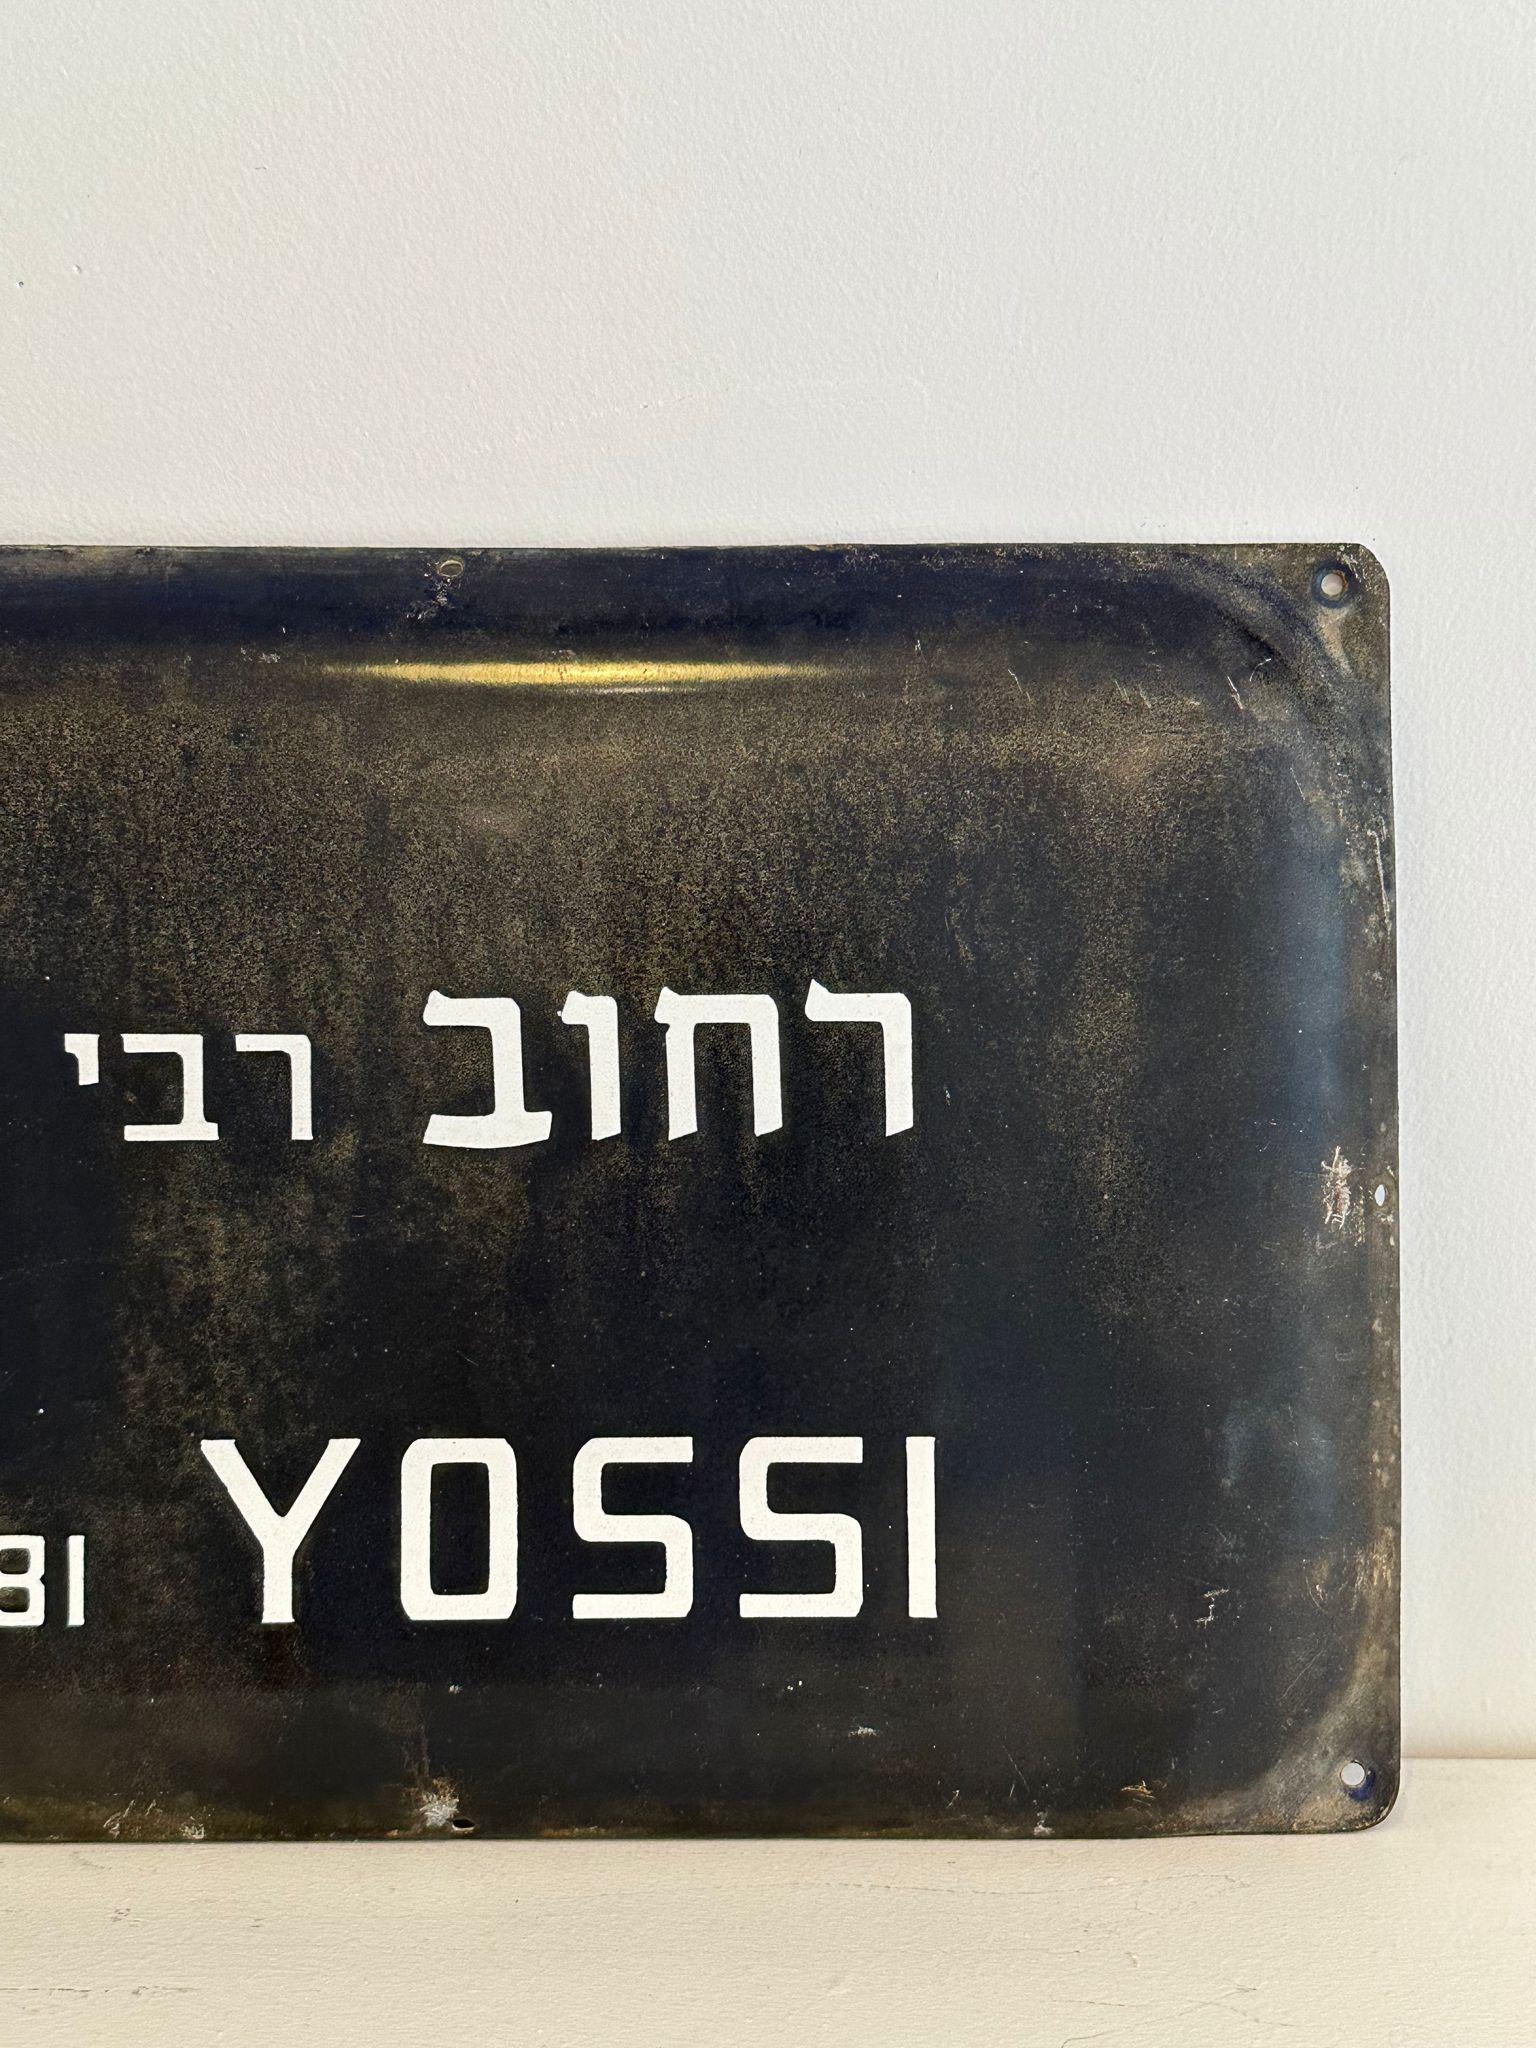 Mid-20th century handmade Israeli street name sign. Made of enamel and iron, this street sign was created shortly after the establishment of the state of Israel in 1948. The sign is written in bolt white letters over a dark blue background, alluding